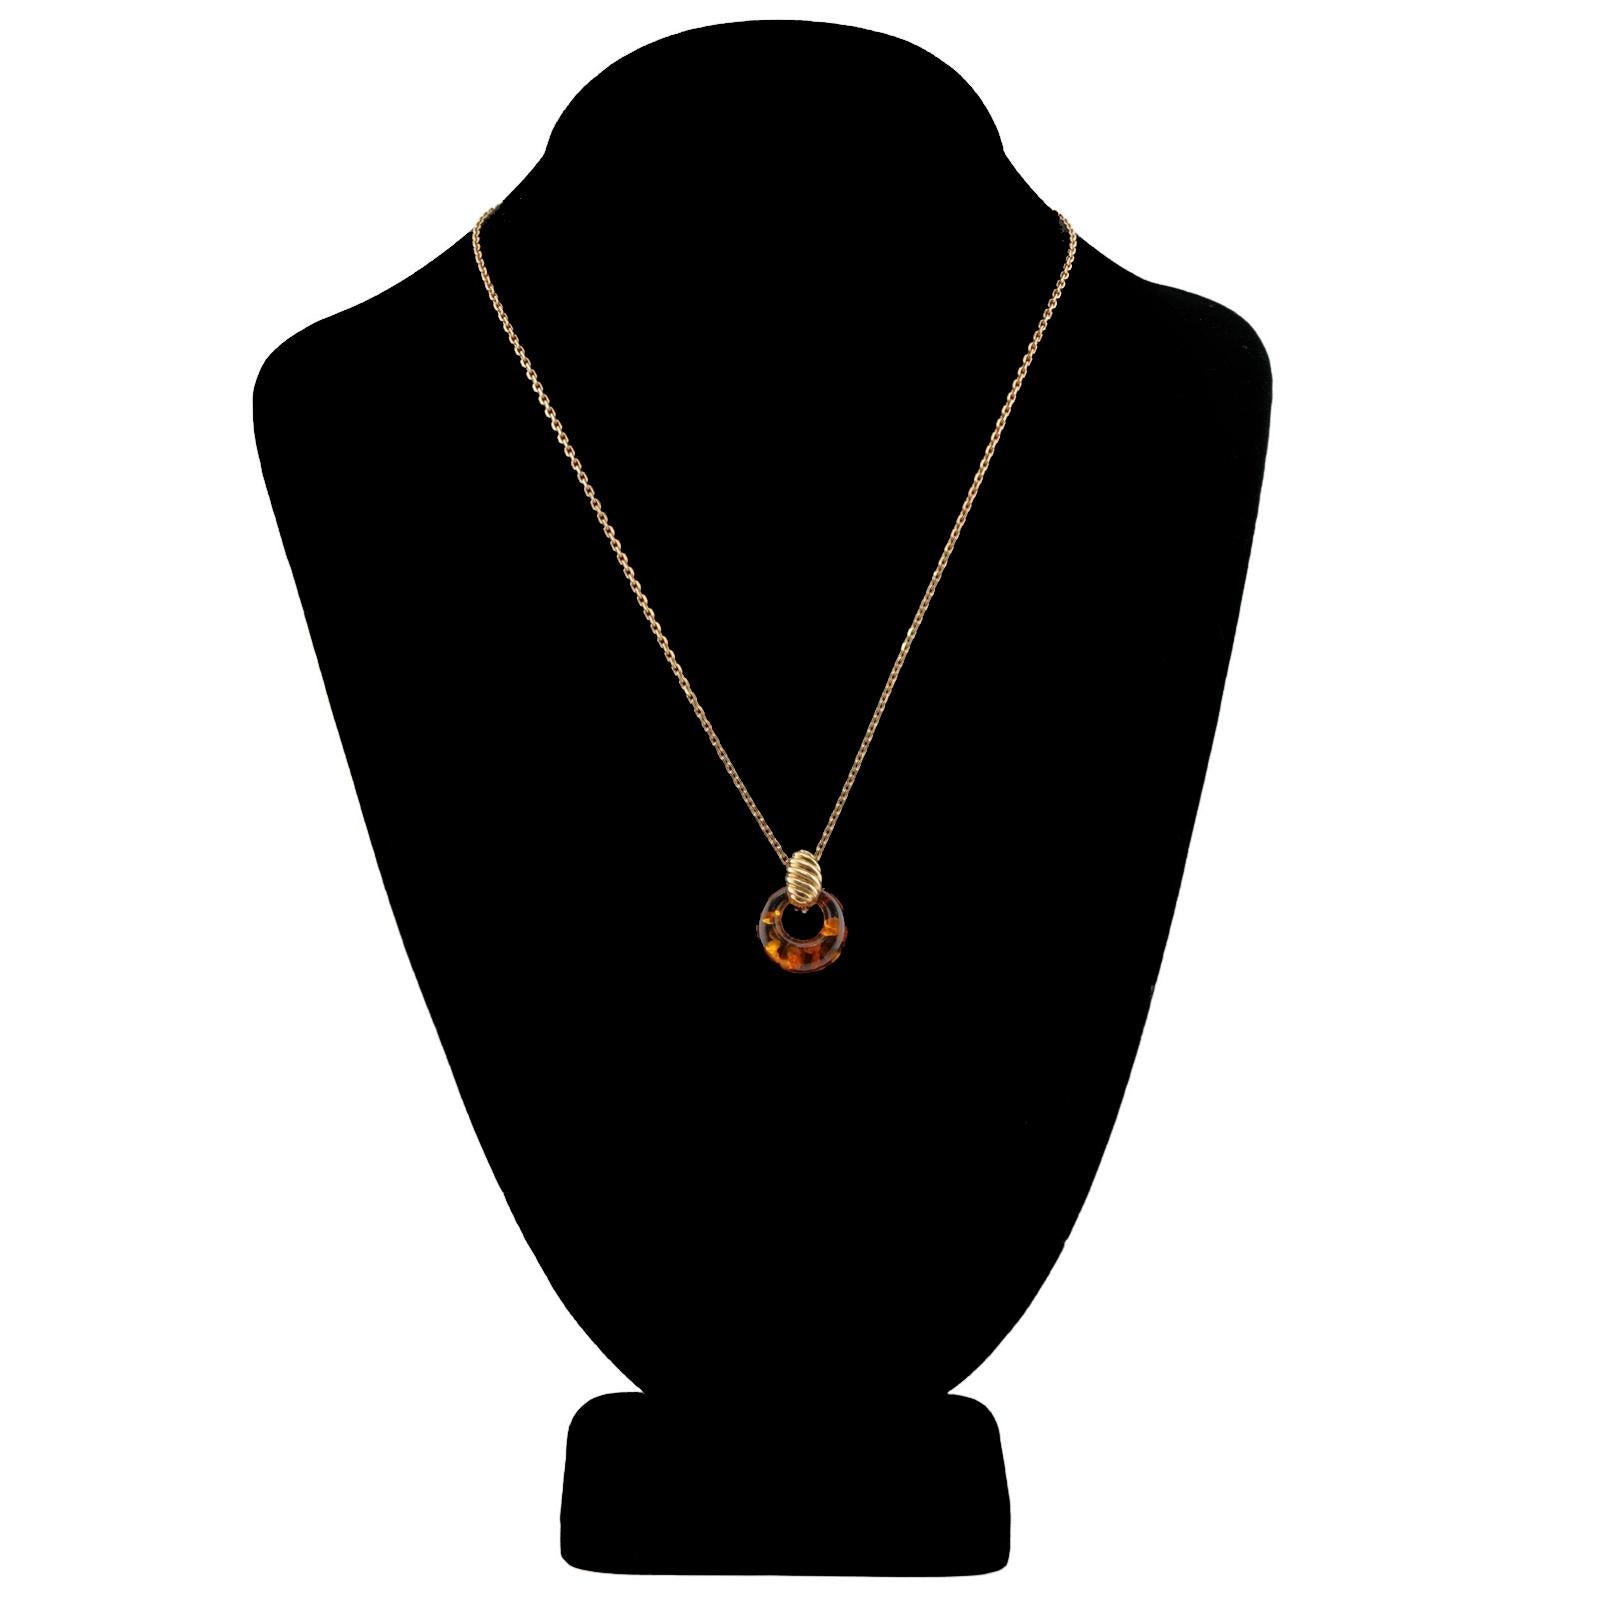 VAN CLEEF & ARPELS Gemstone 18k Yellow Interchangeable Pendant Necklace In Good Condition For Sale In New York, NY